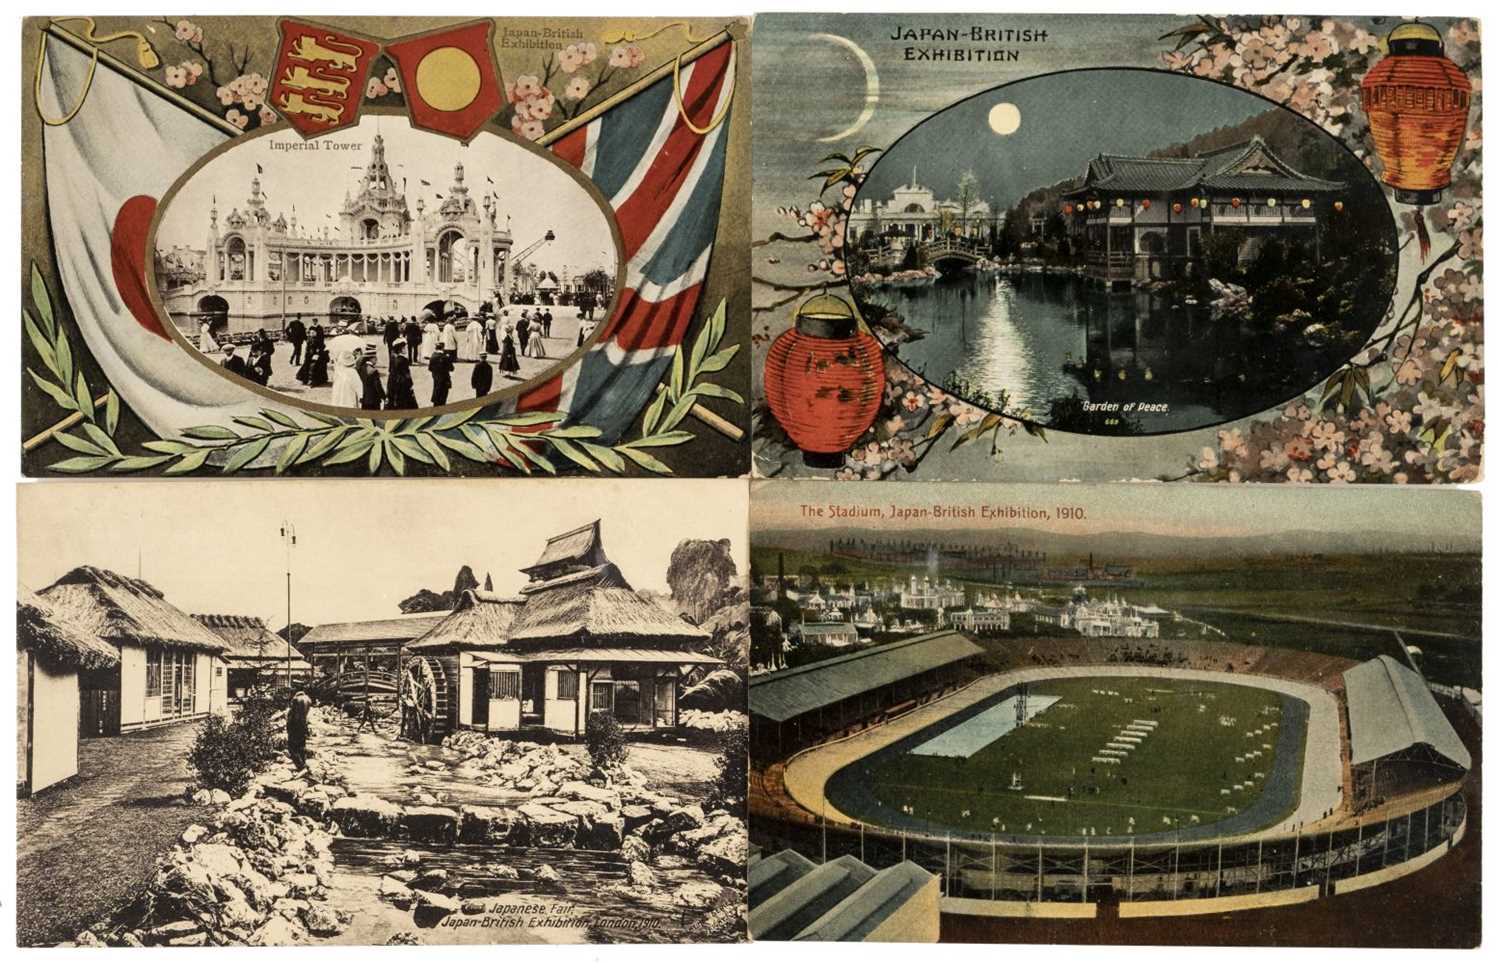 Lot 234 - Postcards. The Japan-British Exhibition of